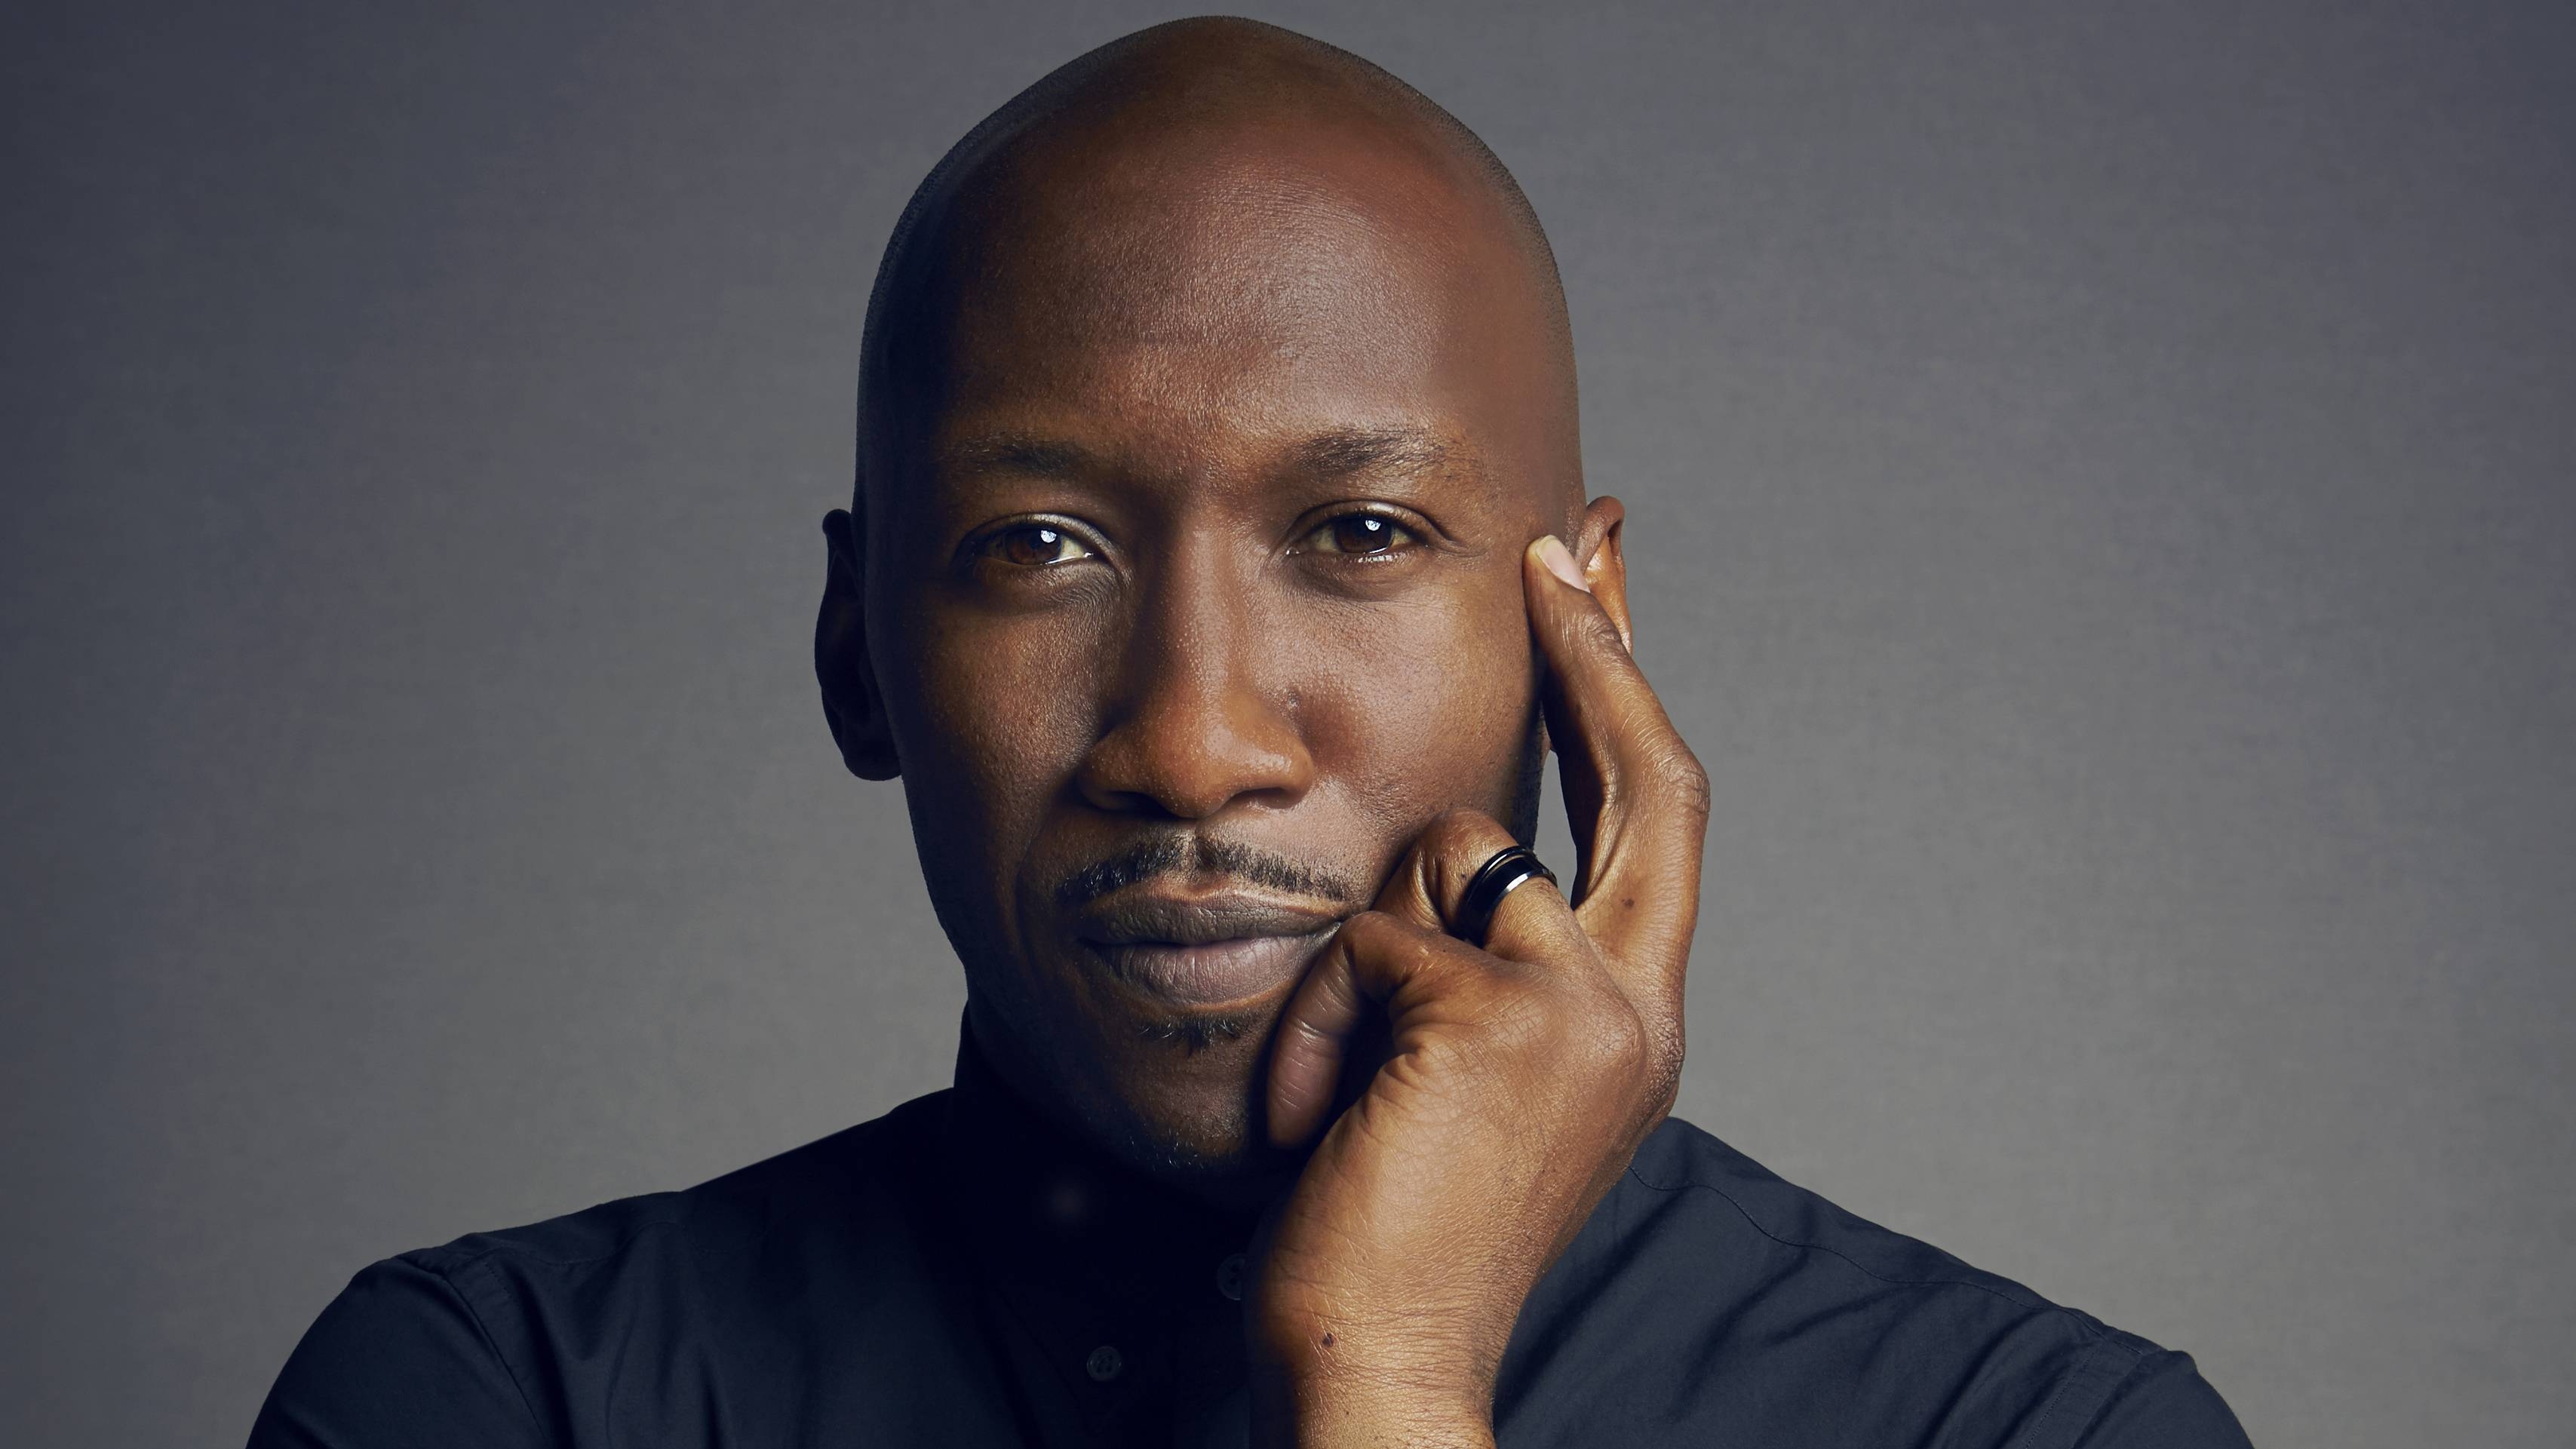 Mahershala Ali has been waiting 16 years to become an overnight sensation